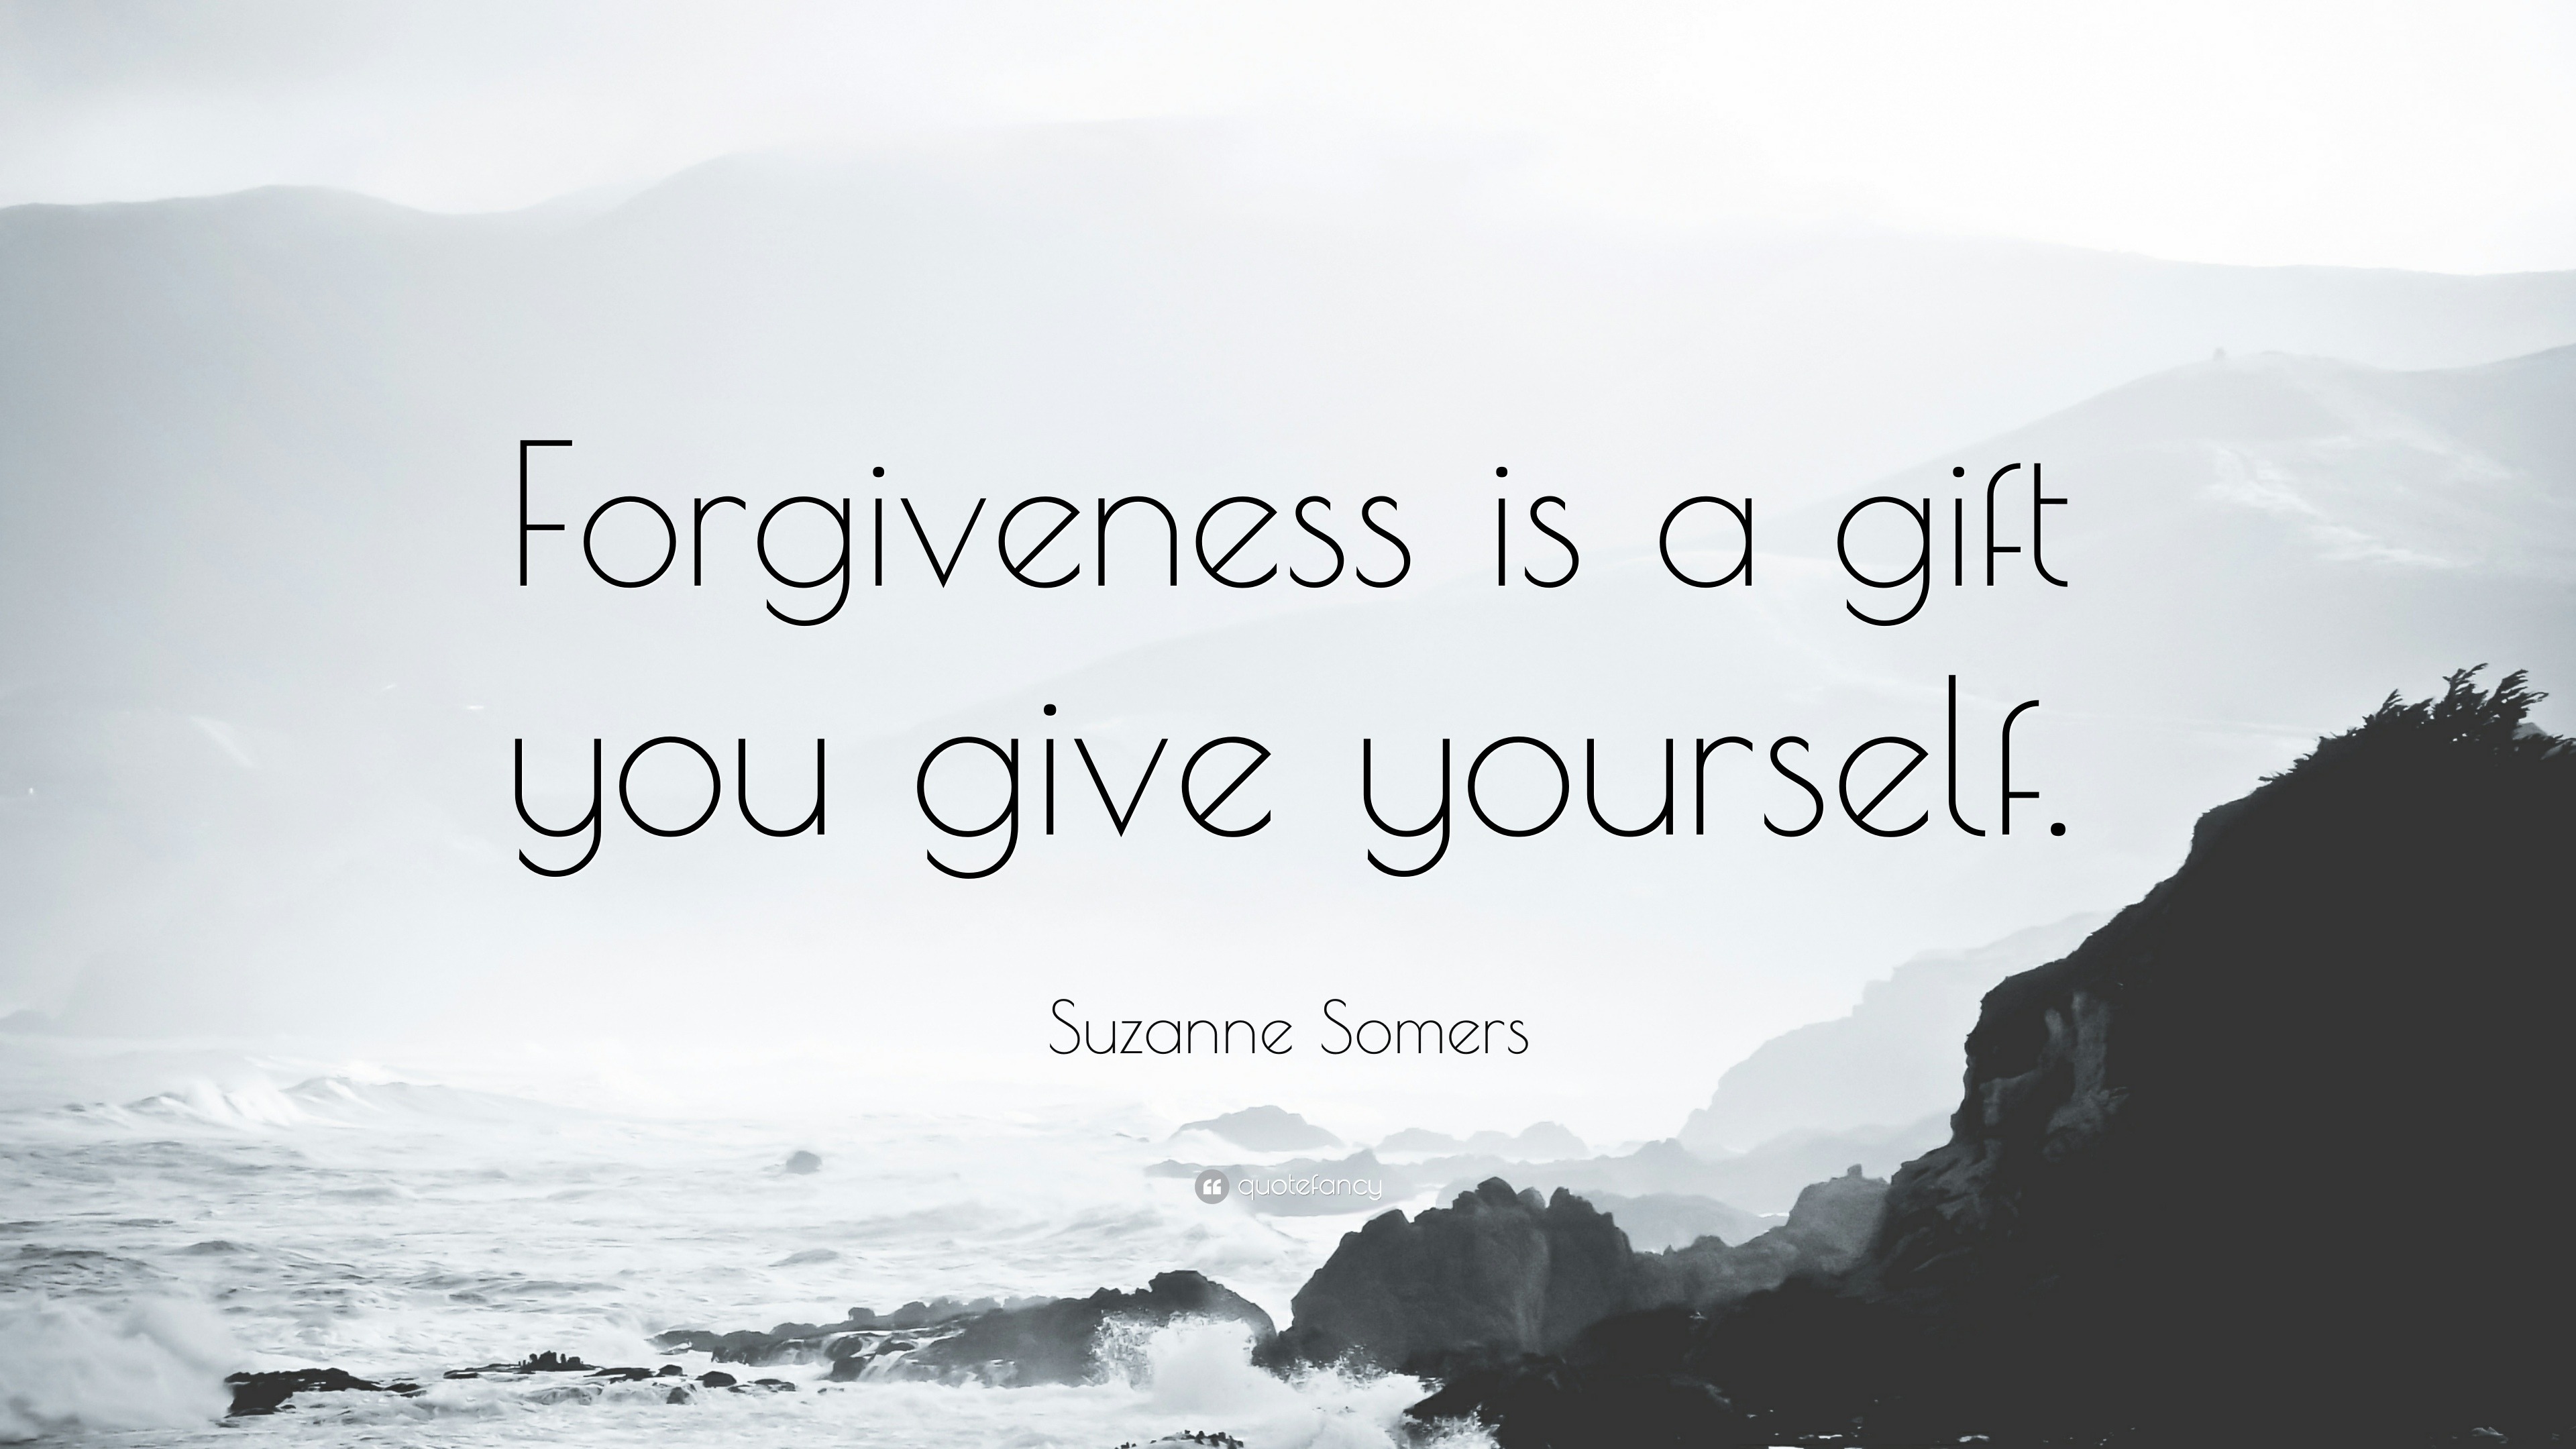 Suzanne Somers Quote Forgiveness Is A Gift You Give Yourself 24 Wallpapers Quotefancy